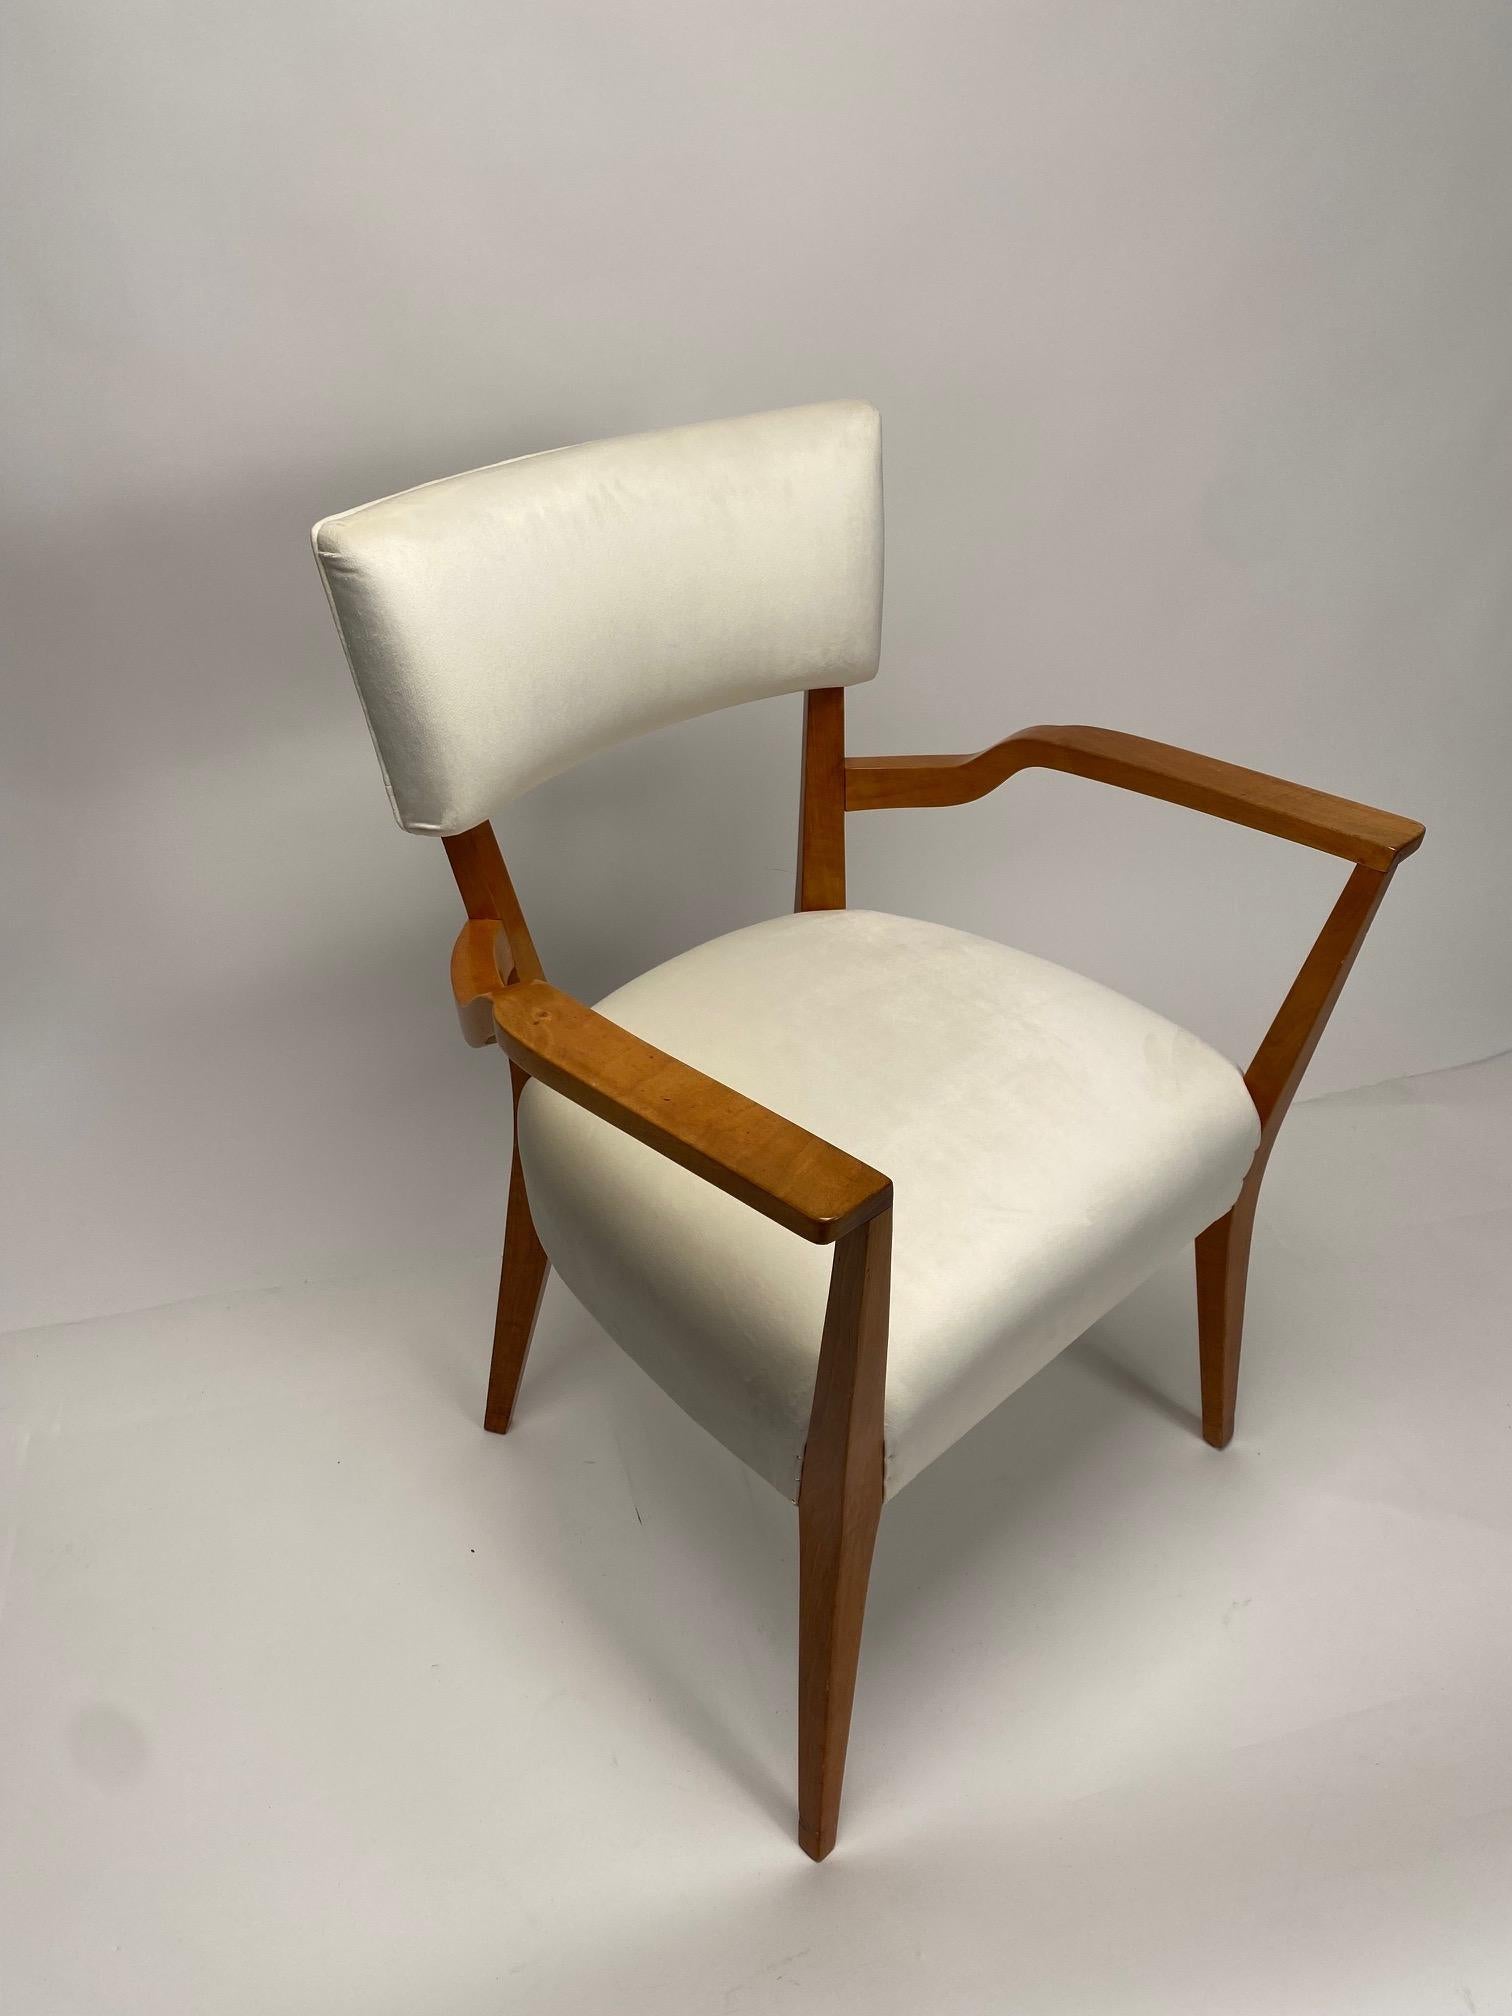 Pair of Mid-Century Organic Armchairs, Gio Ponti Style, velvet and wood, 1950s For Sale 5